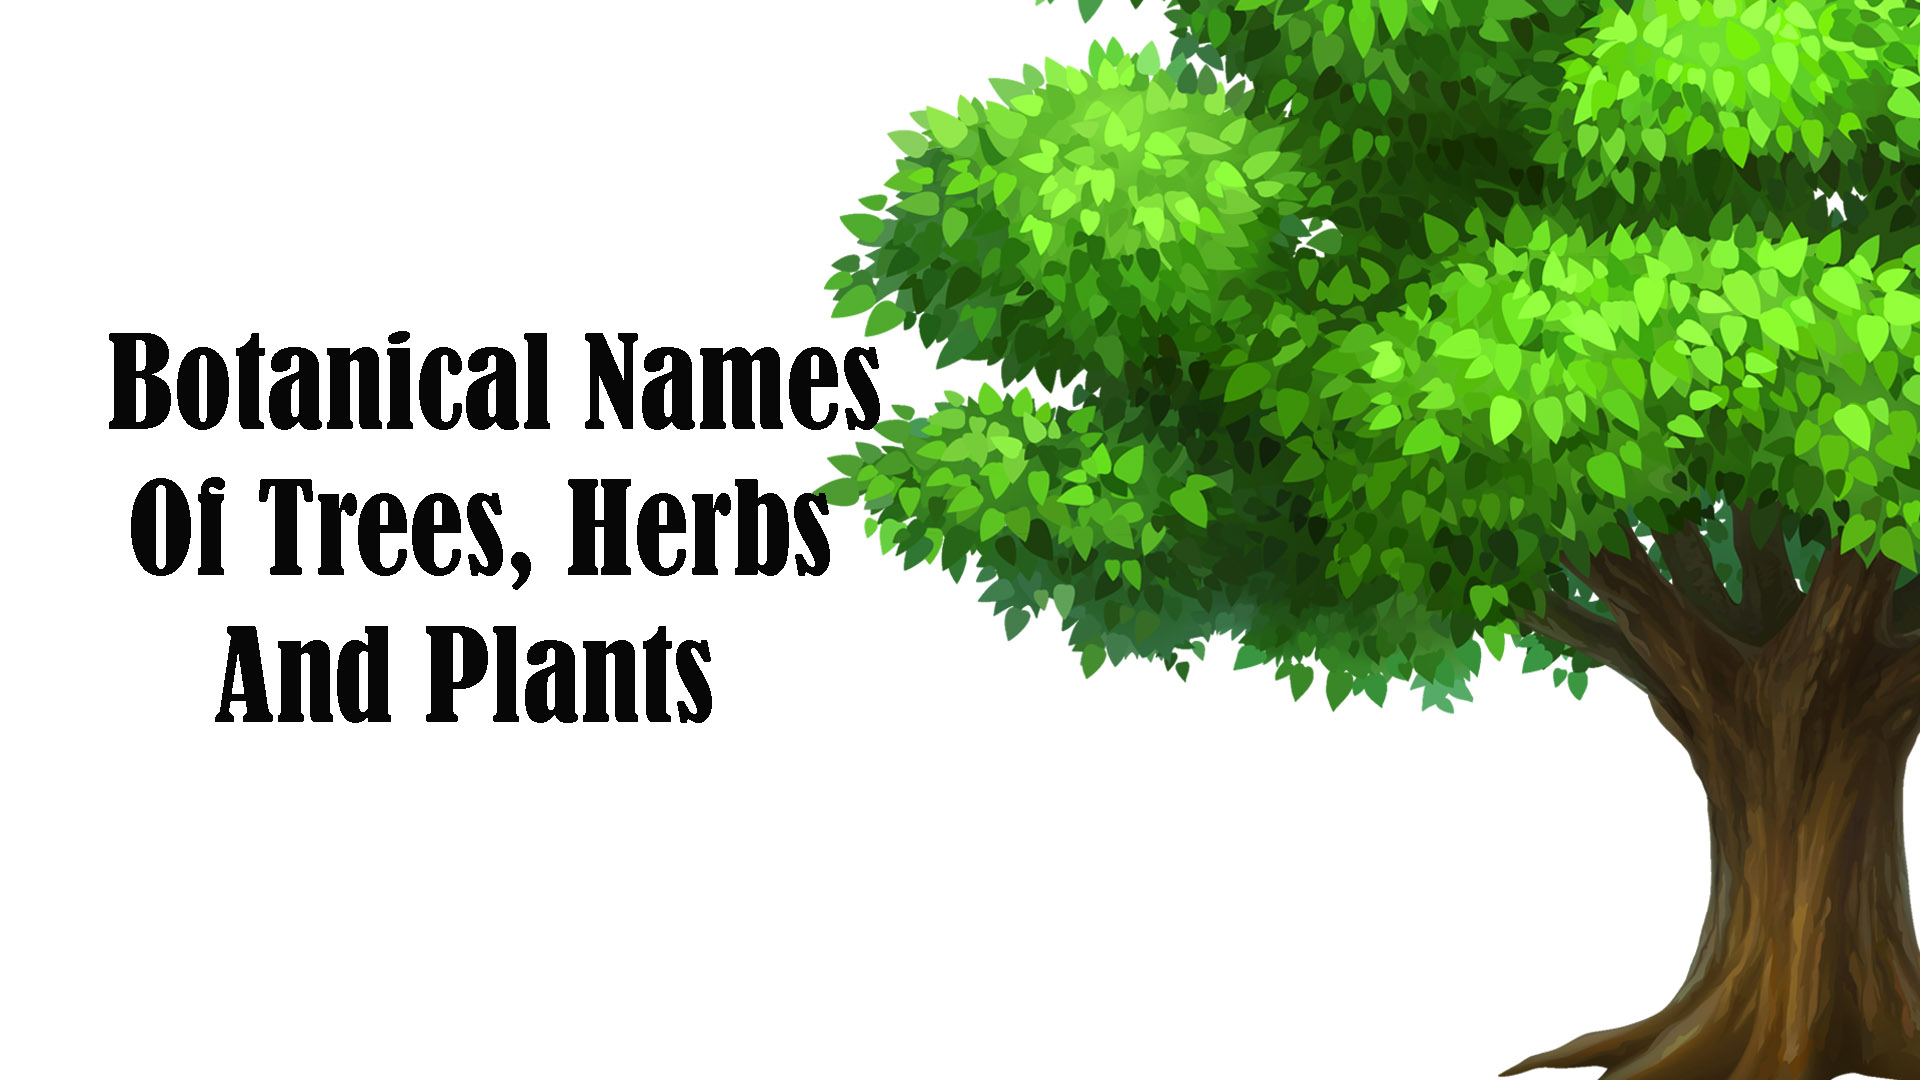 Botanical-Names-Of-Trees,-Herbs-And-Plants